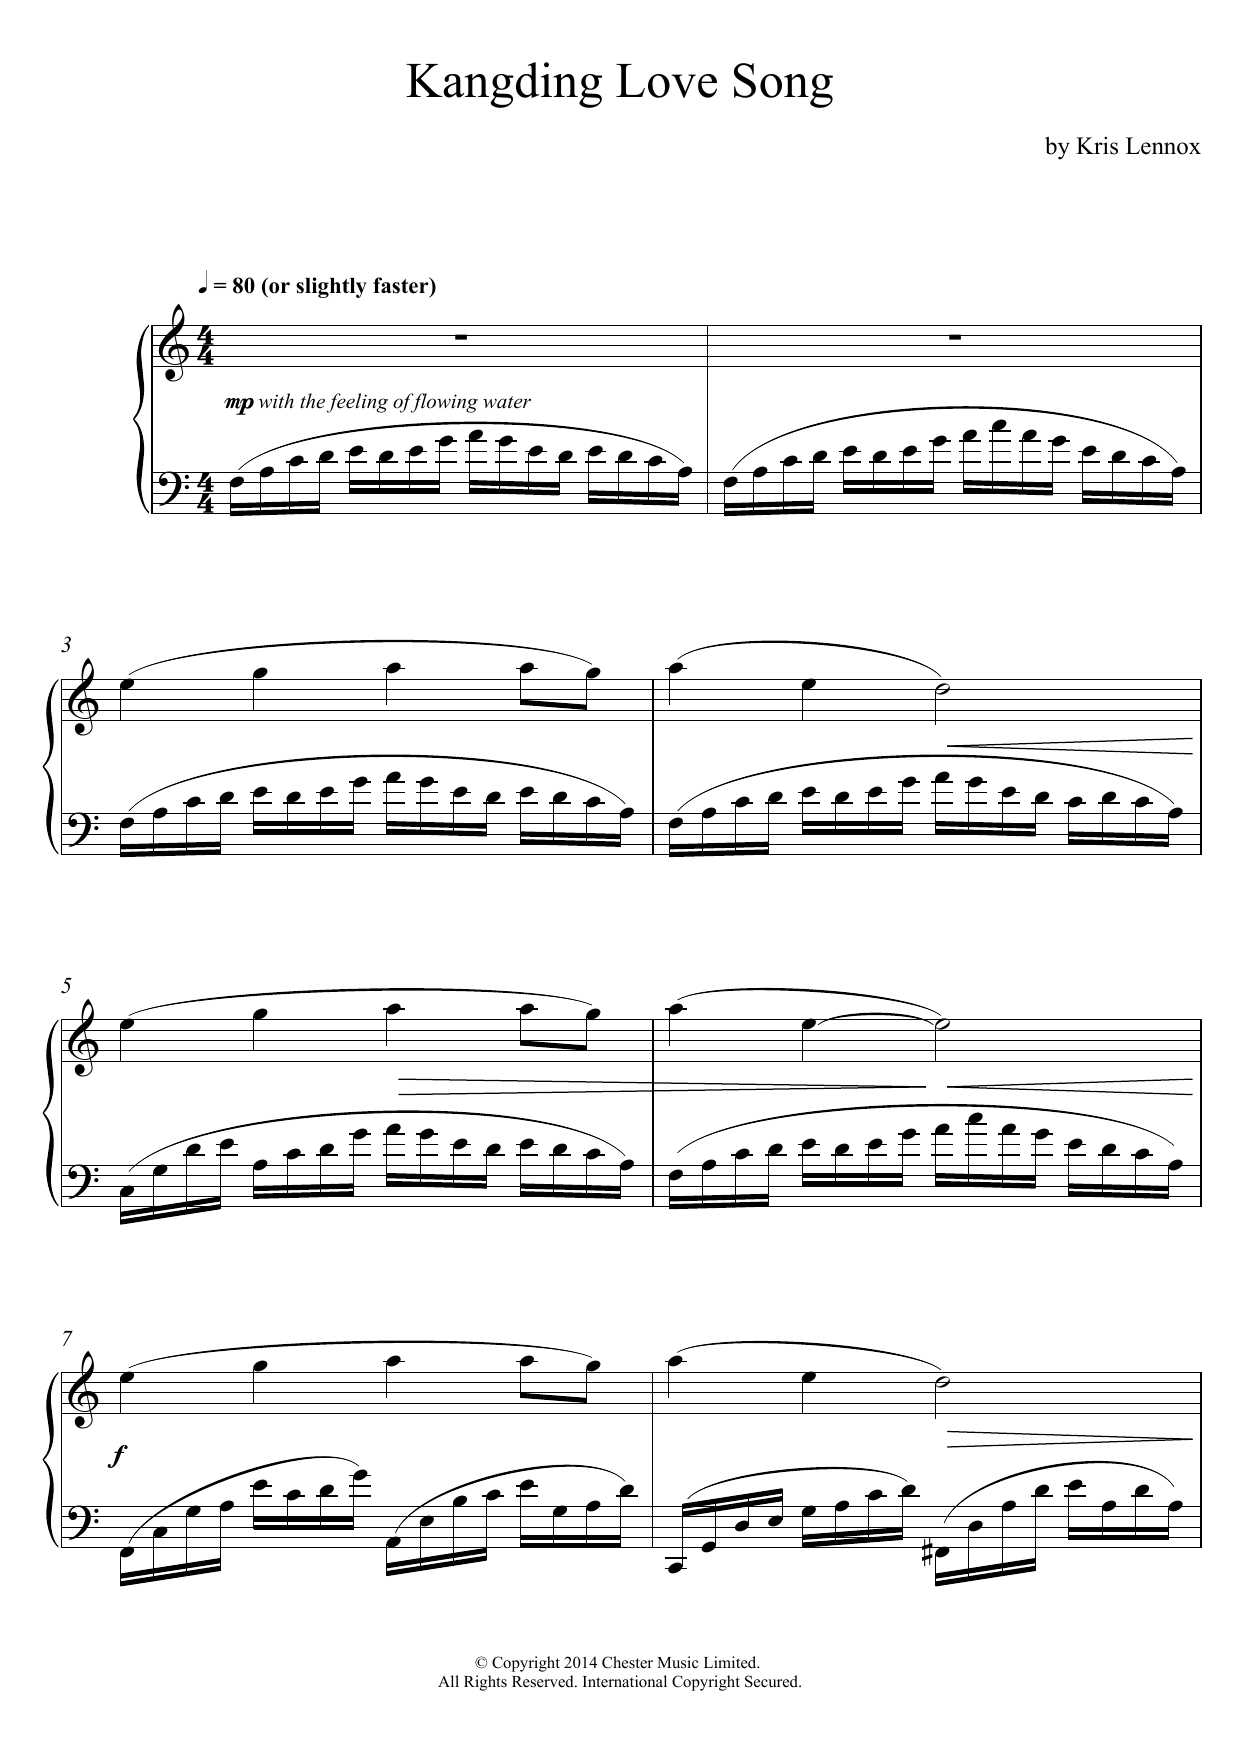 Kris Lennox Kangding Love Song Sheet Music, Kangding Love Song music notes for Sample Page